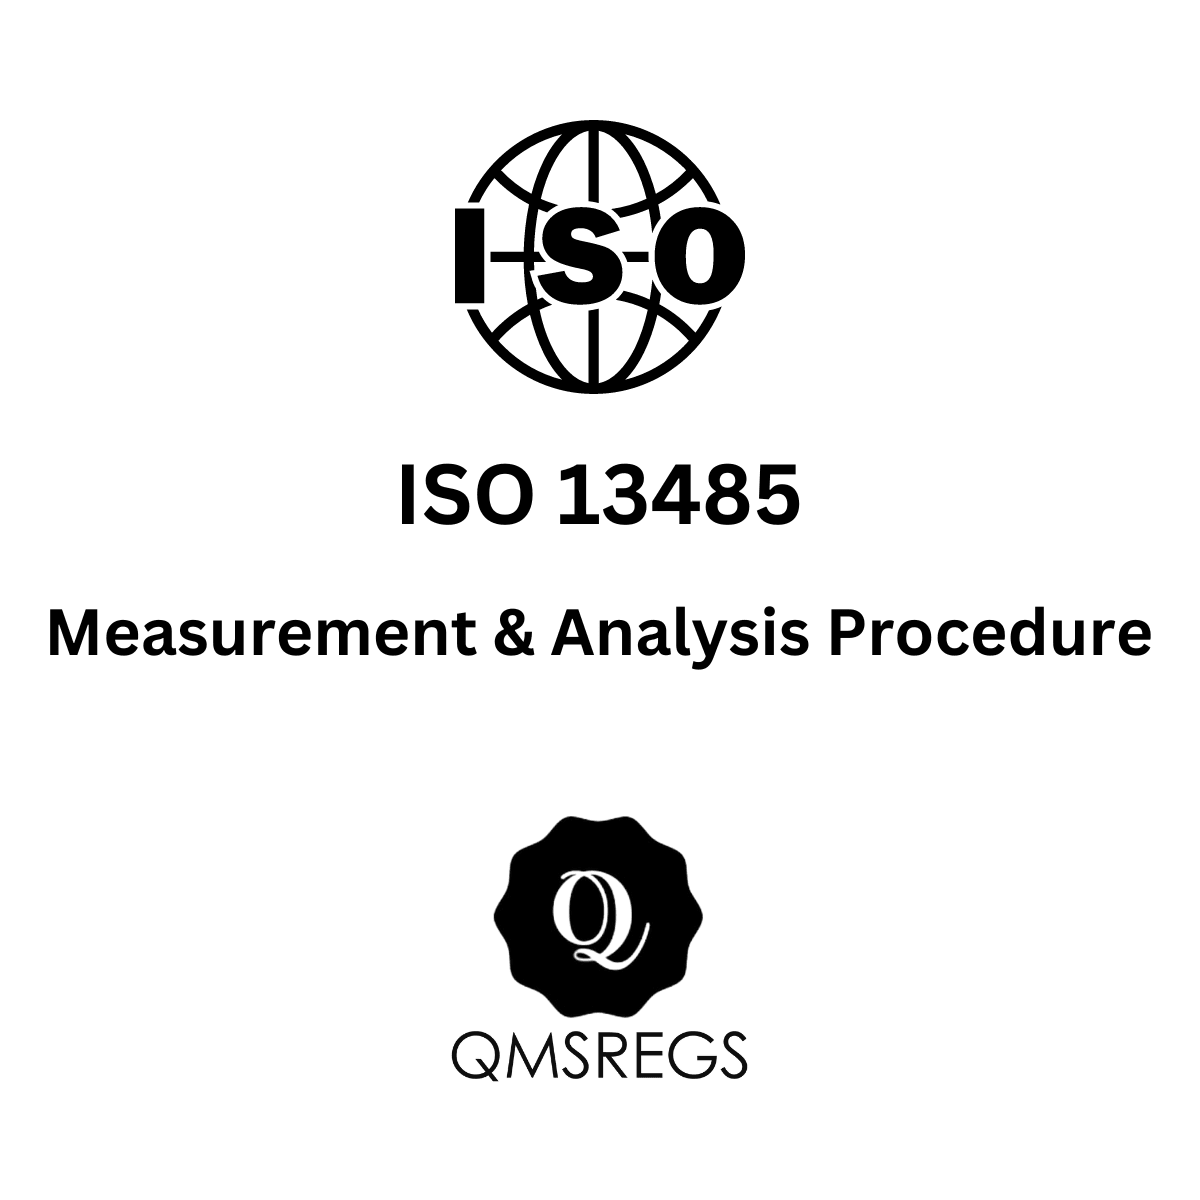 ISO 13485 Measurement and Analysis Procedure Template